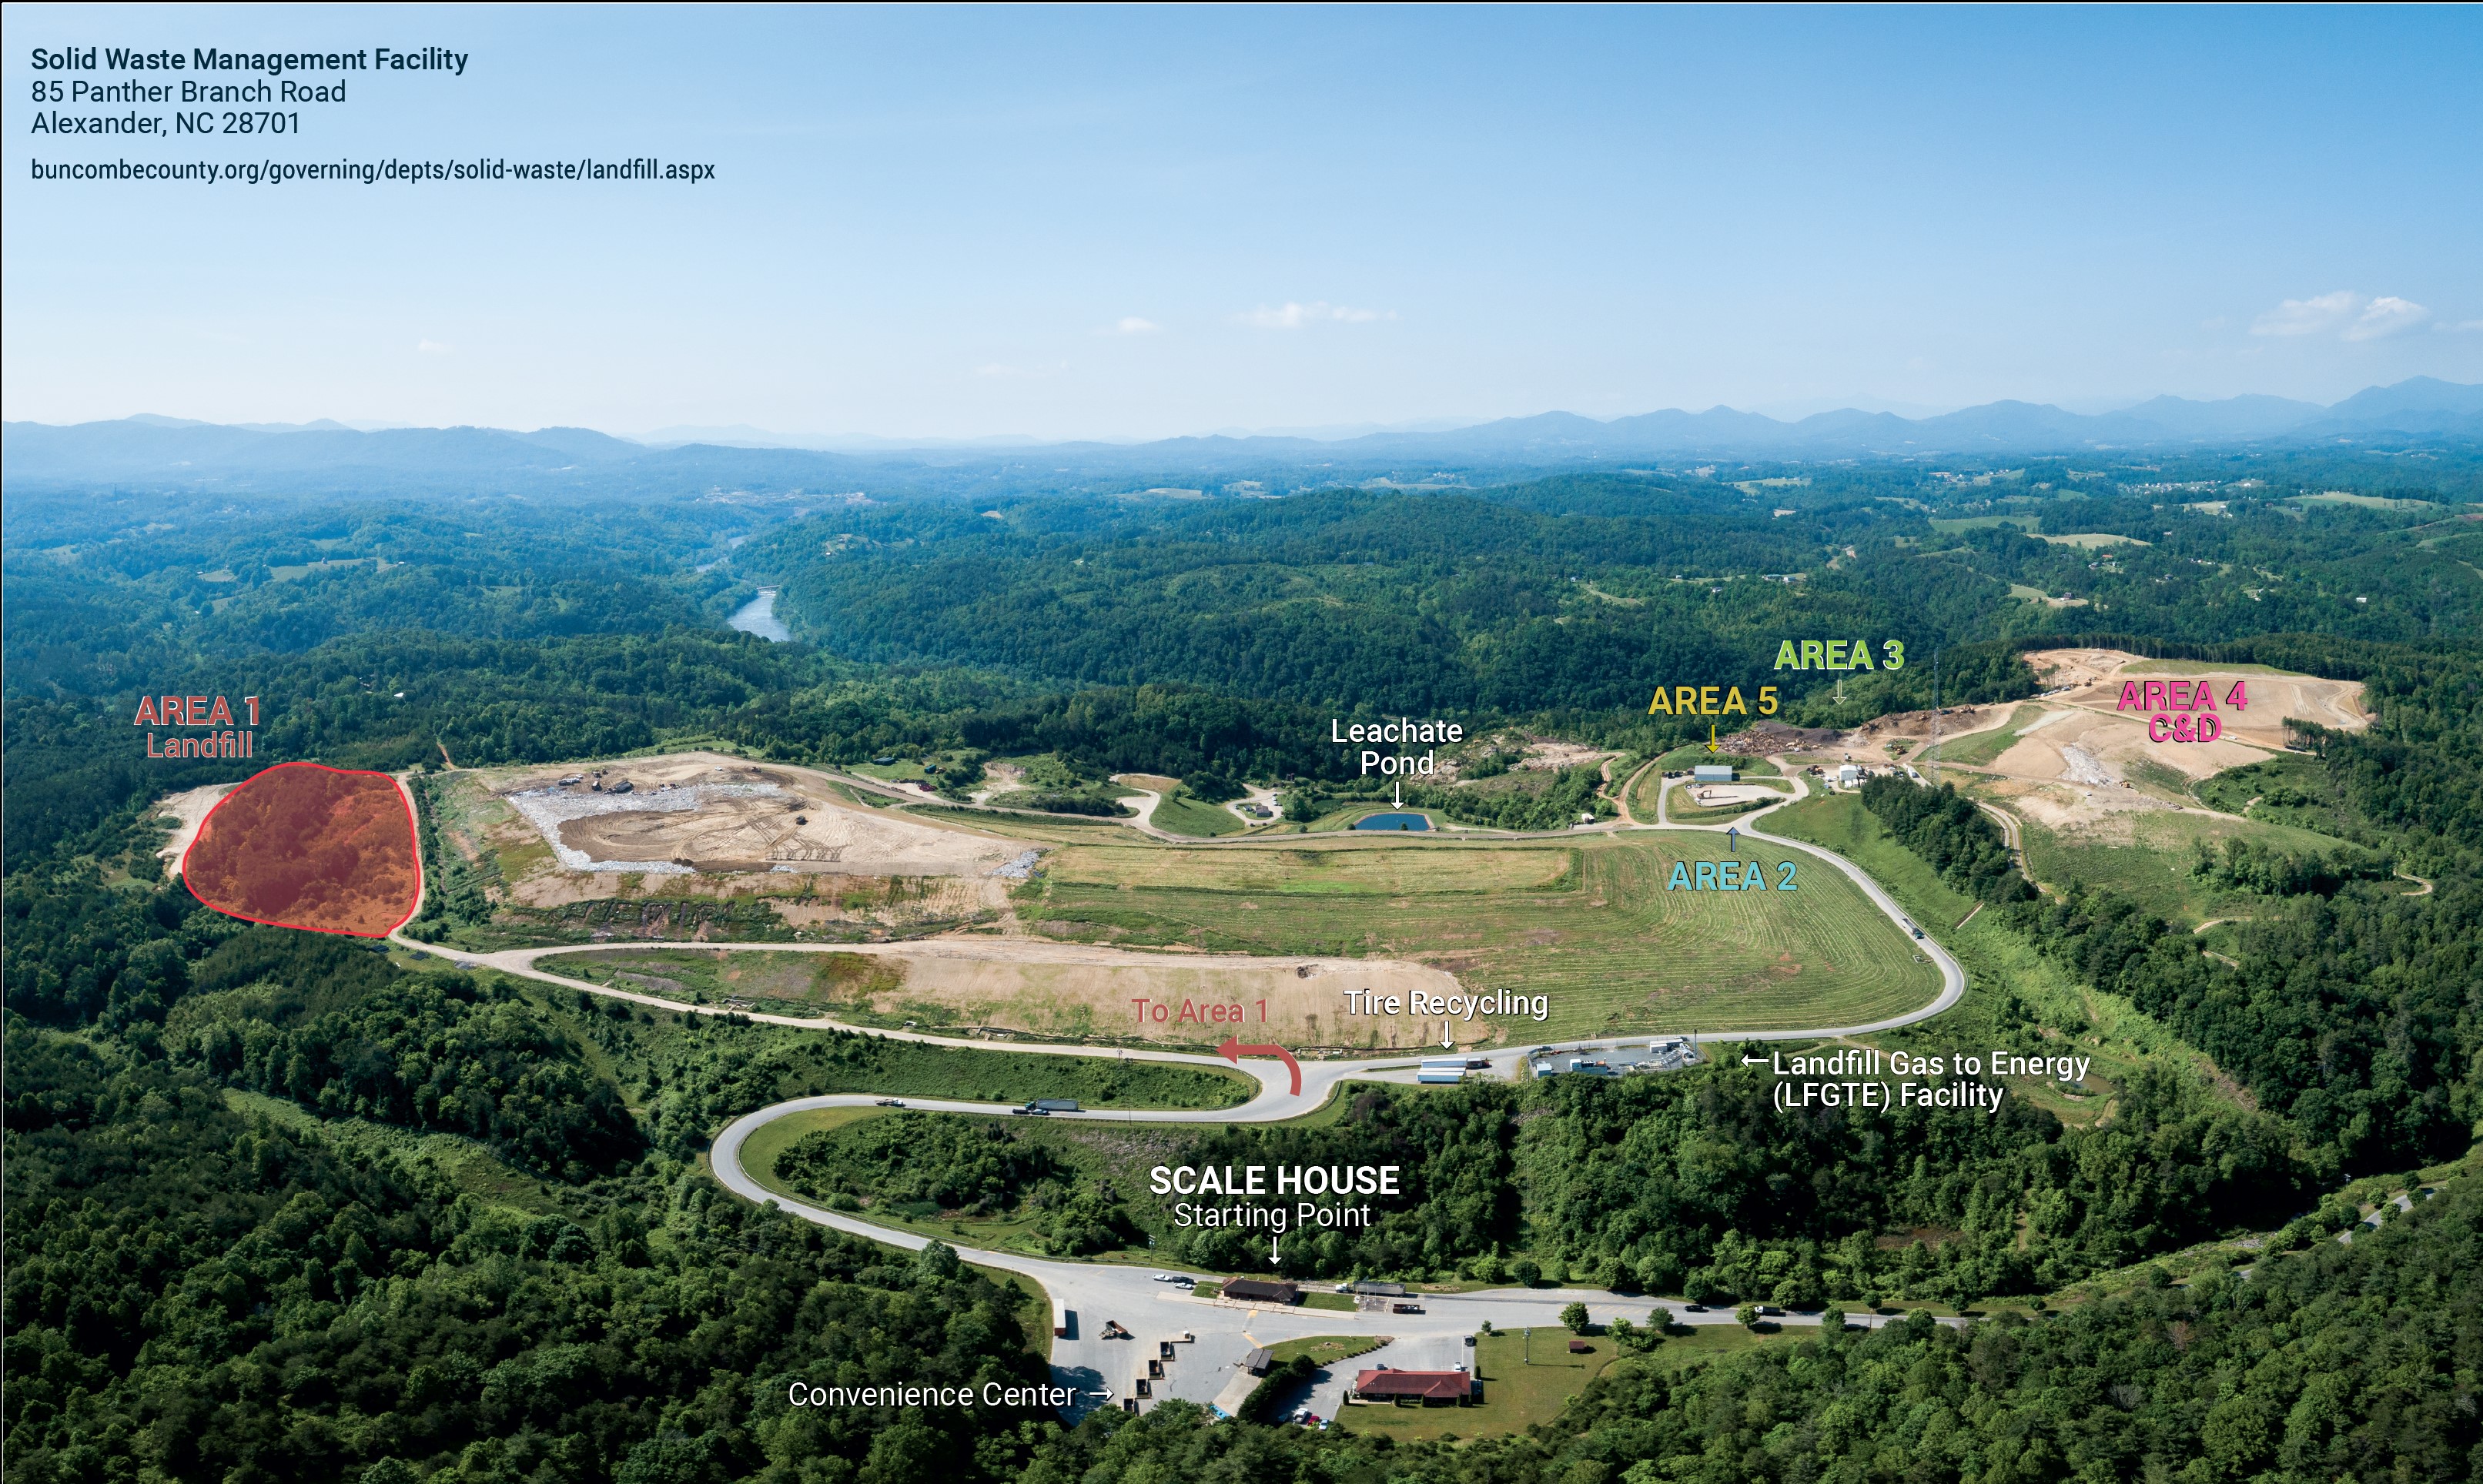 Arial photo of the Buncombe County Landfill